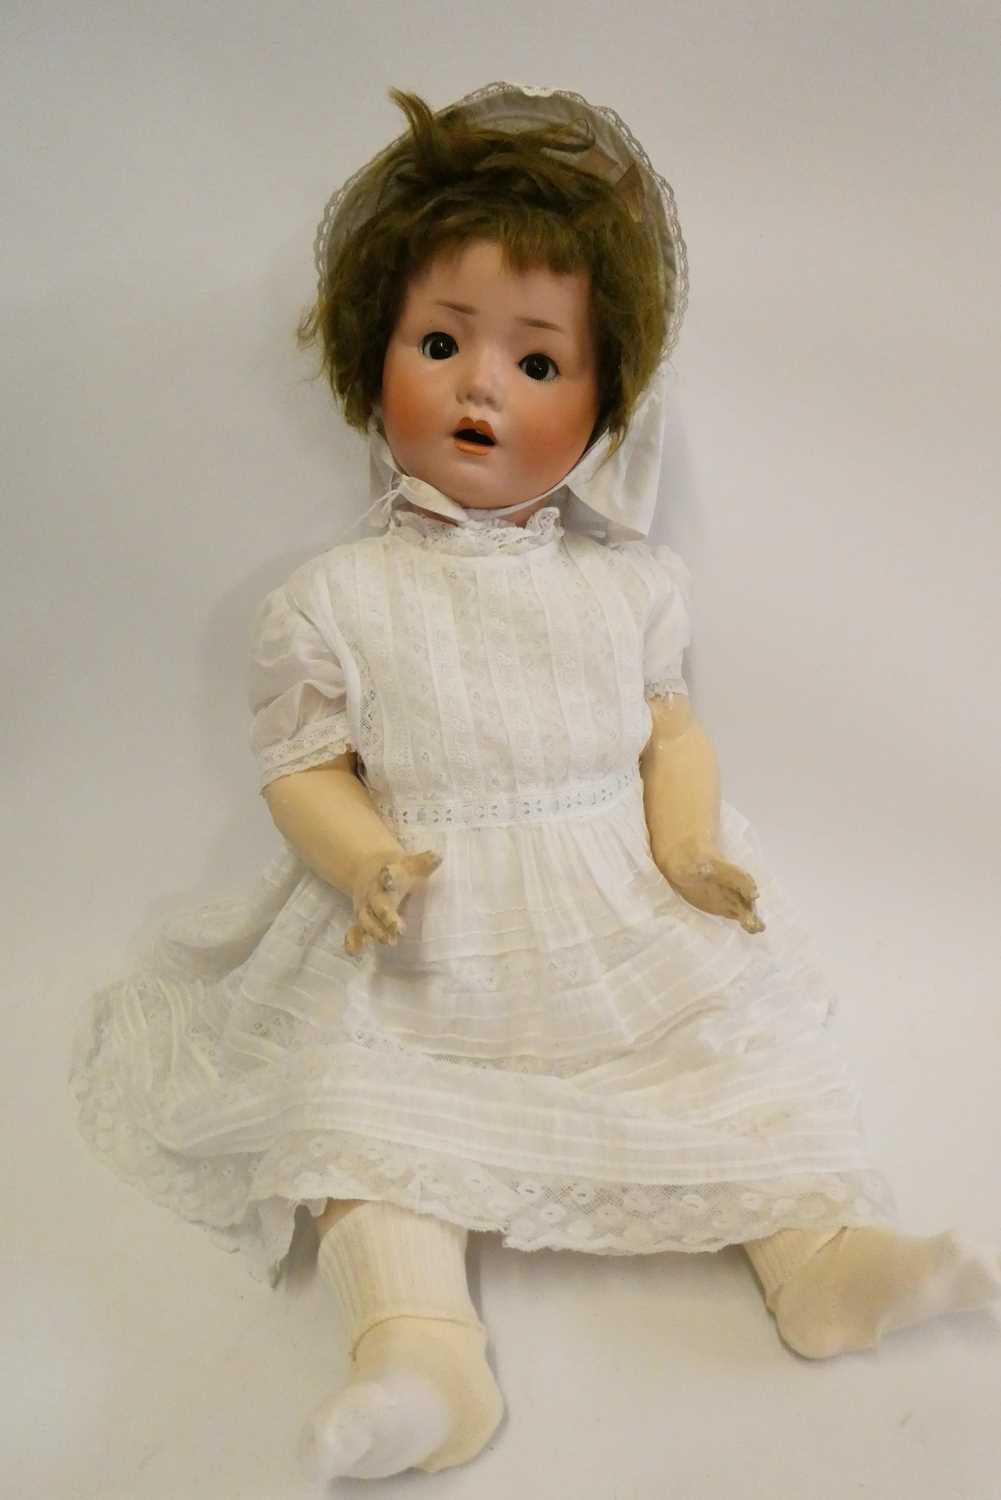 A Schoenau & Hoffmeister bisque socket head doll, brown glass sleeping eyes, open mouth, composition